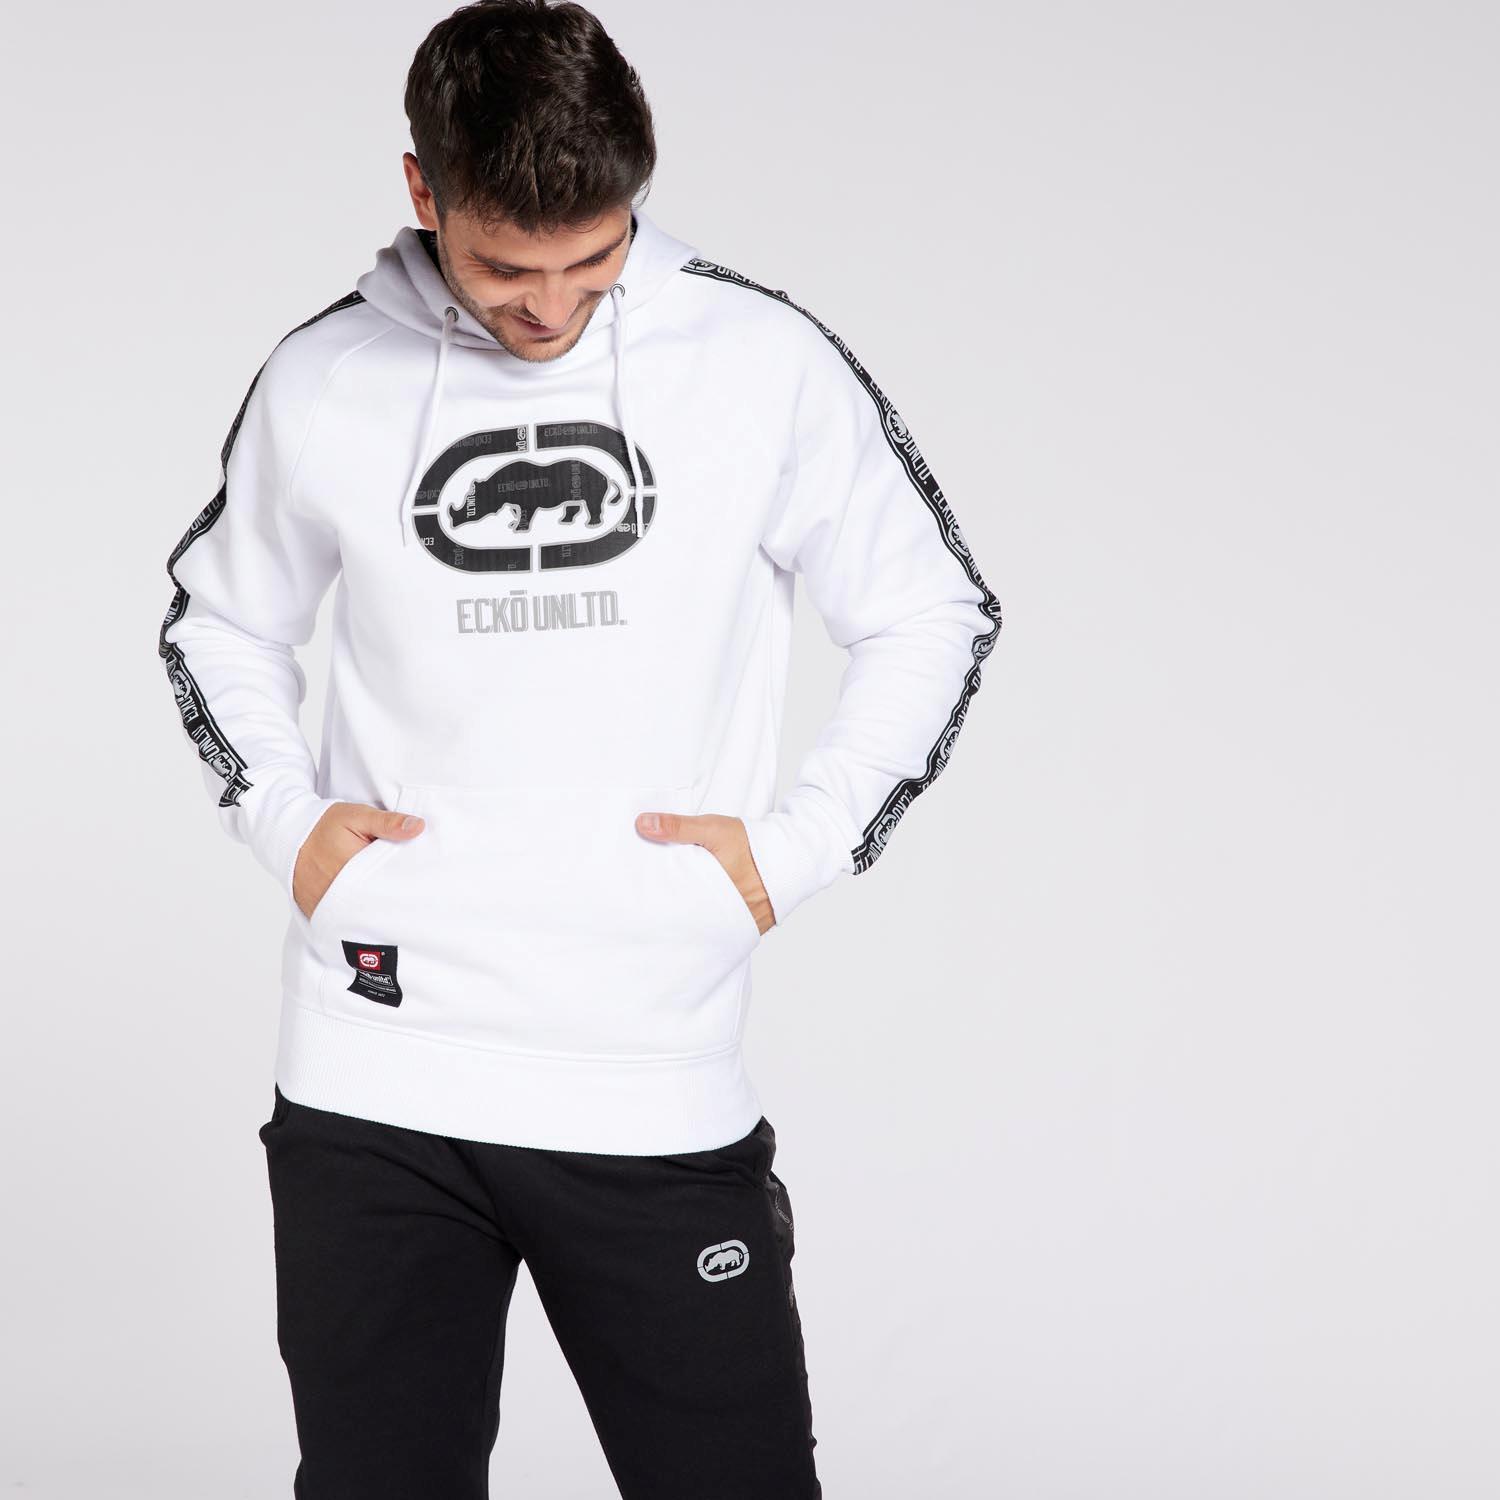 Ecko Discovery - Blanc - Sweat-shirt Capuche Homme sports taille M